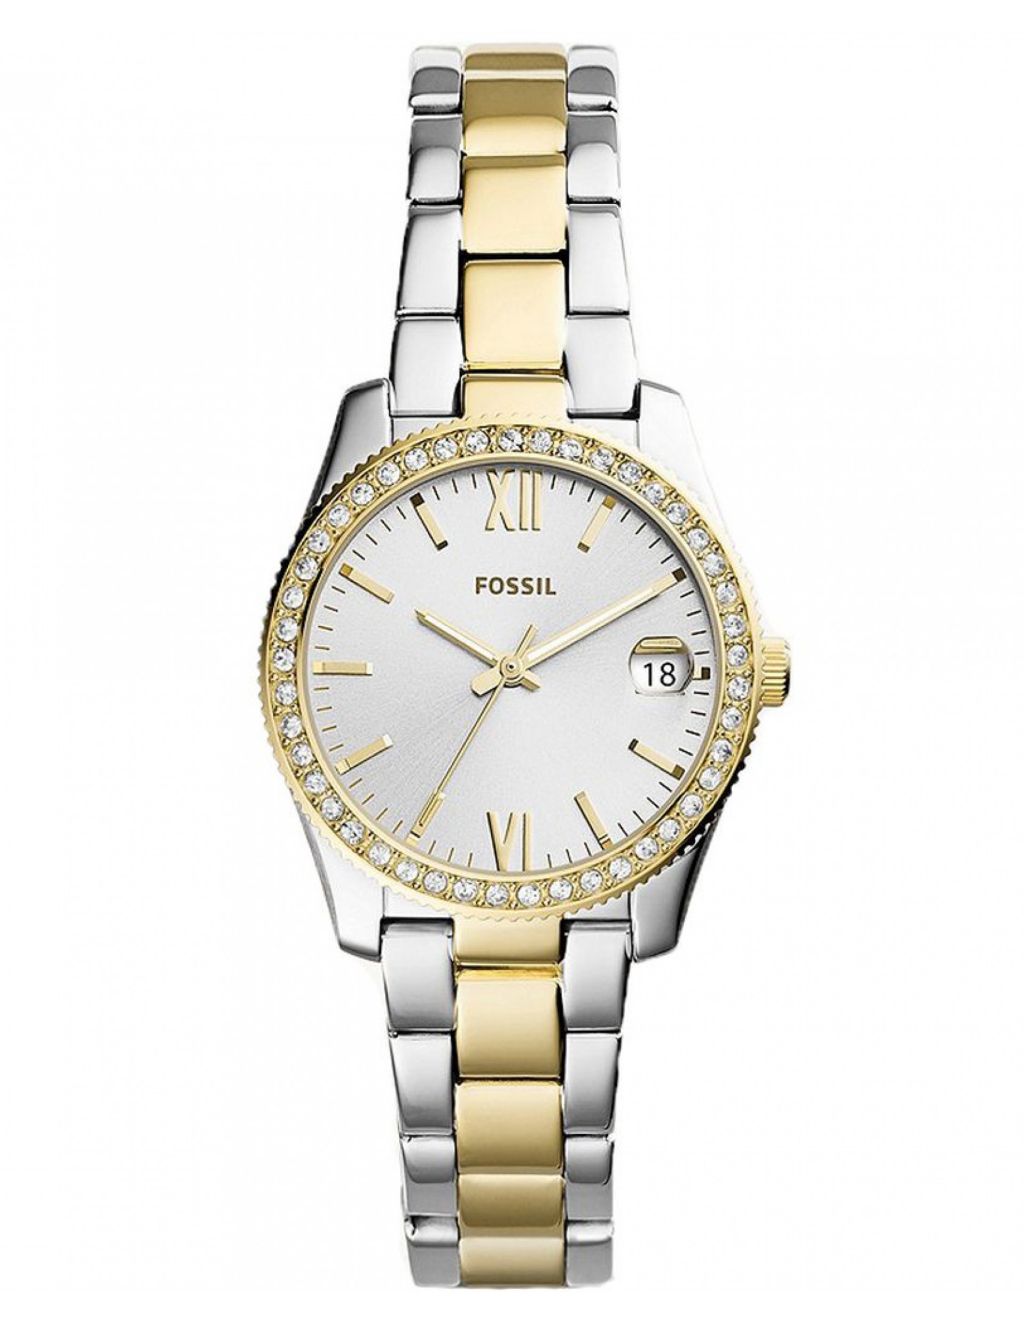 Fossil Scarlette Stainless Steel Watch image 1